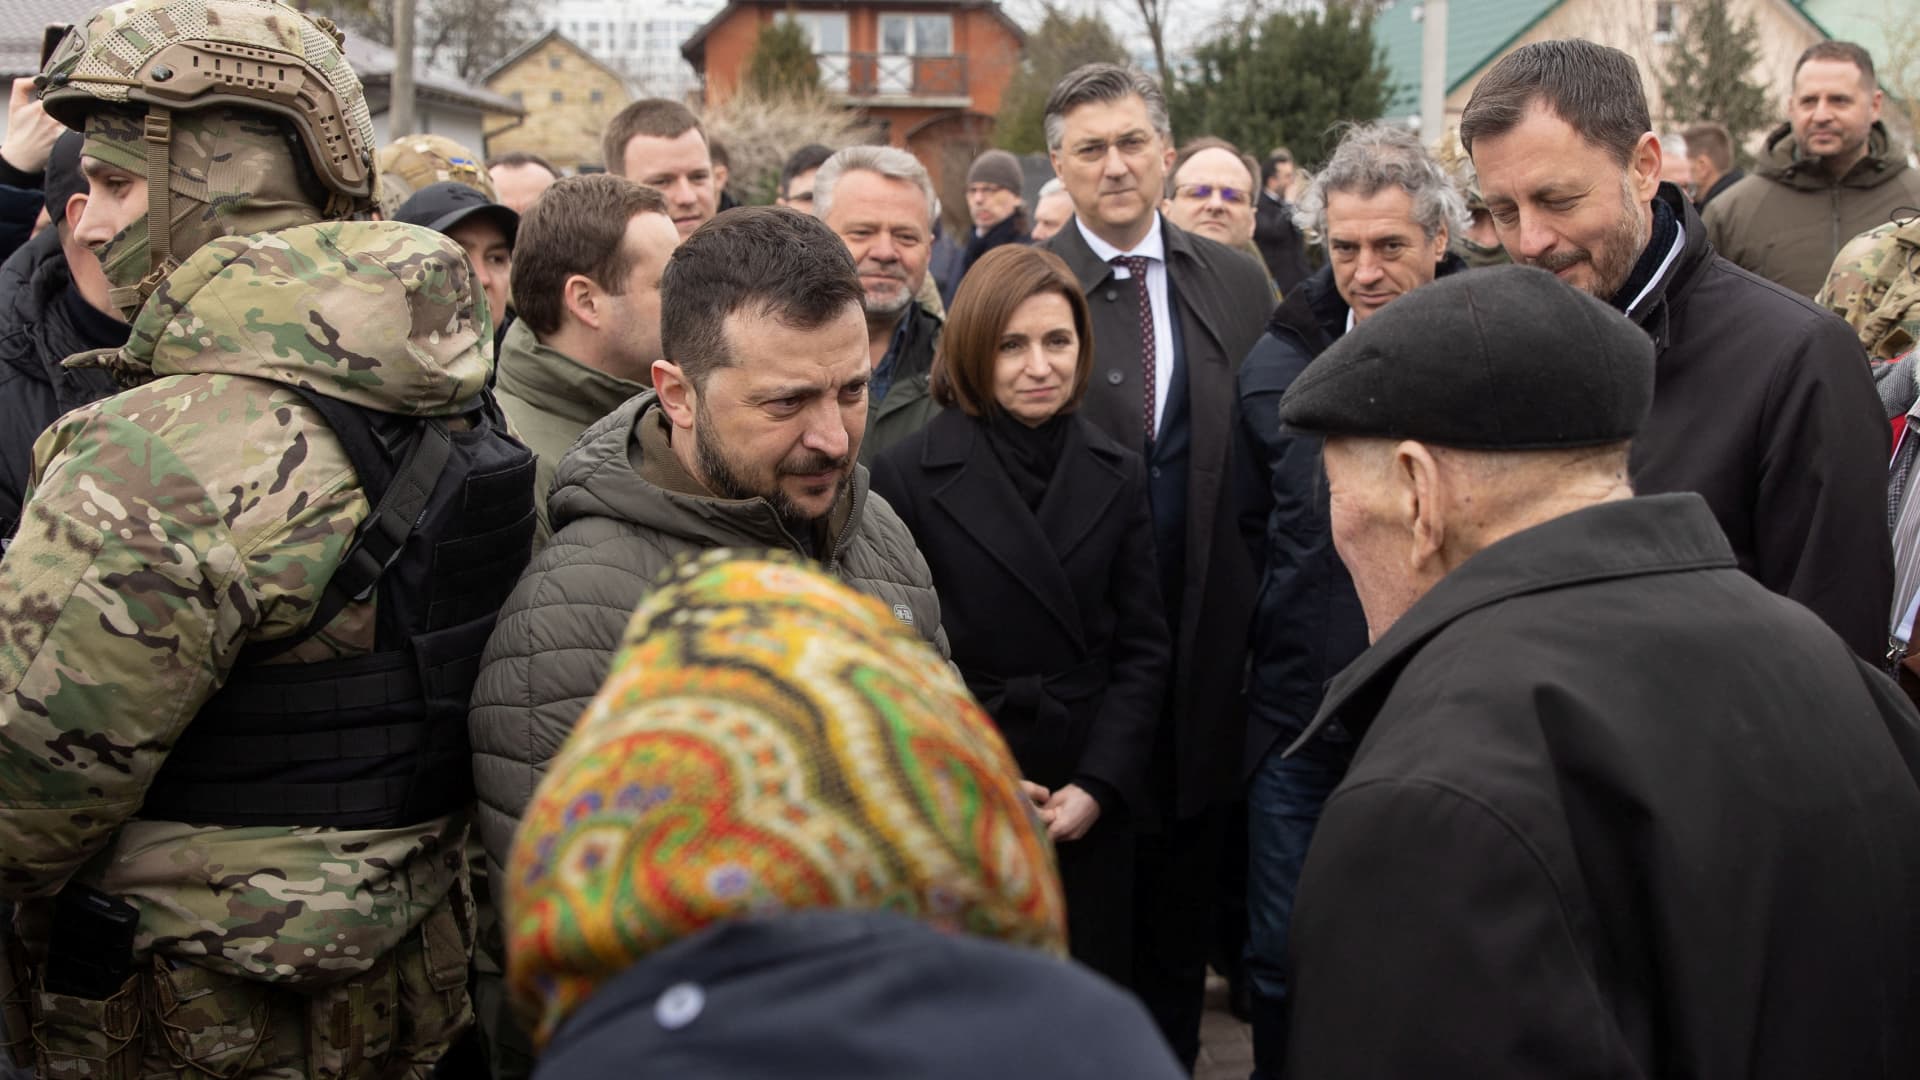 Slovenia's Prime Minister Robert Golob, Ukraine's President Volodymyr Zelenskiy, Moldovan President Maia Sandu, Croatian Prime Minister Andrej Plenkovic and Slovakian Prime Minister Eduard Heger speak with local residents as they visit the town of Bucha marking the first anniversary of its liberation, amid Russia's attack on Ukraine, outside of Kyiv, Ukraine March 31, 2023. 